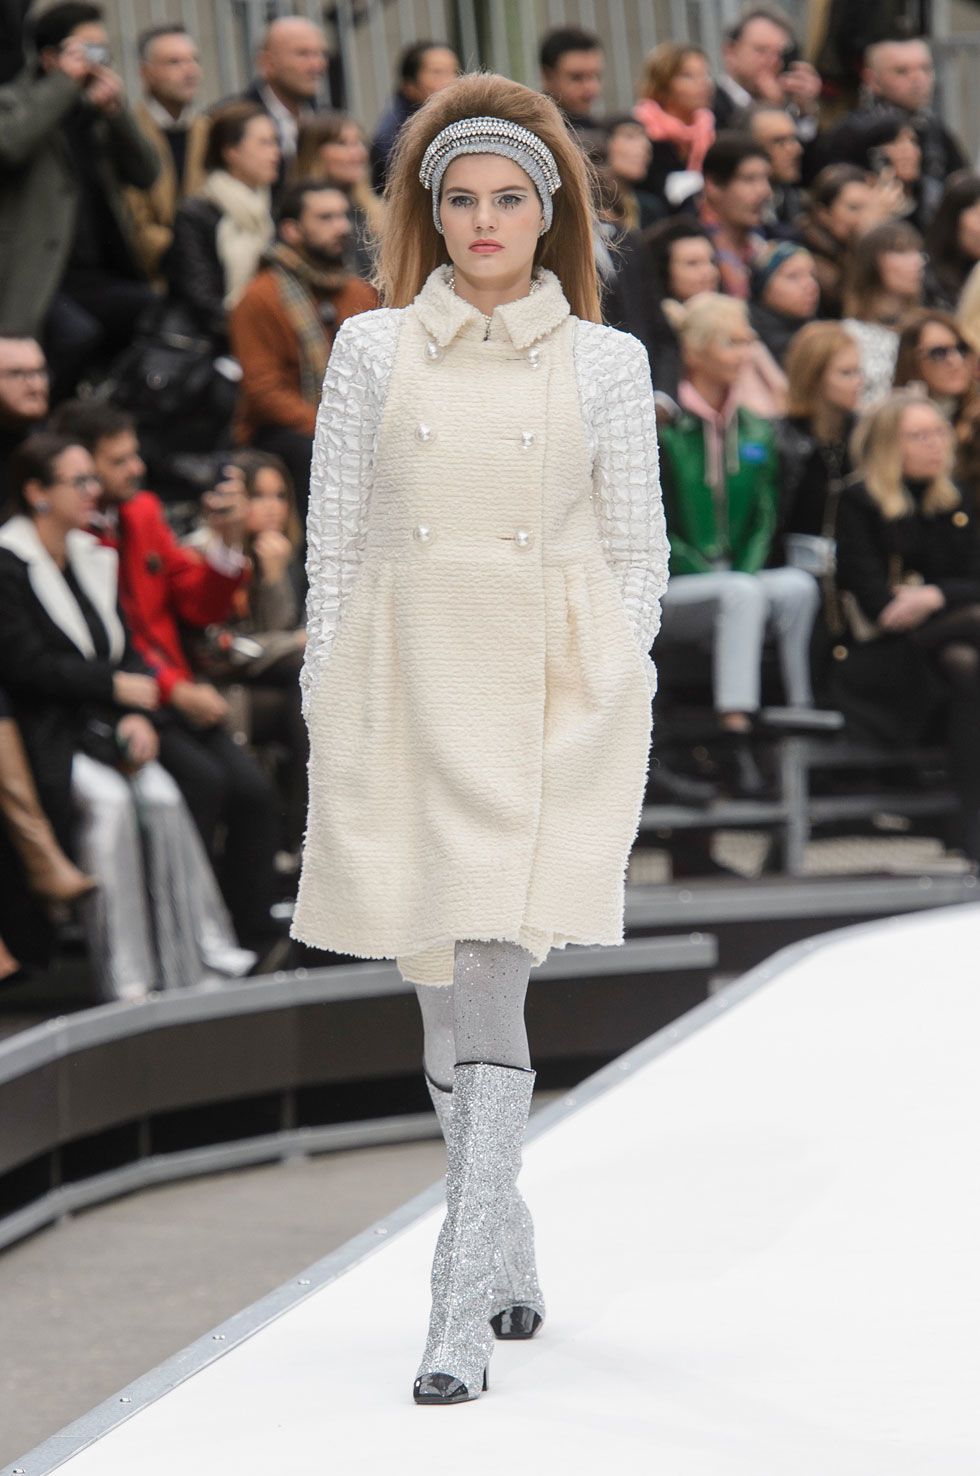 96 Looks From Chanel Fall 2017 PFW Show - Chanel Runway at Paris ...